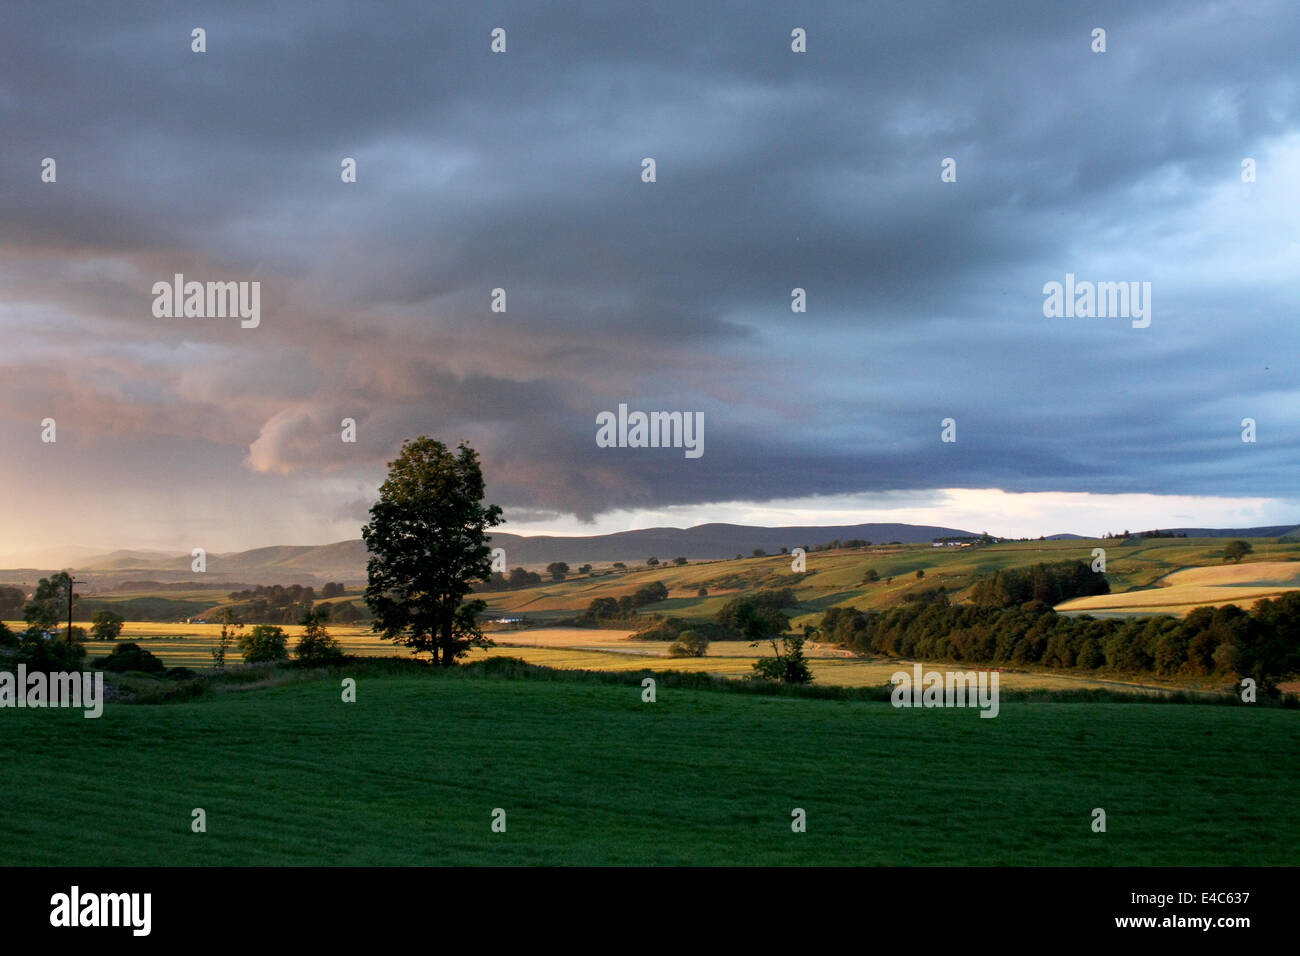 Nithsdale, Dumfries and Galloway, UK. 7th July, 2014.  Sunset over the Lowther Hills above Nithsdale in Dumfries and Galloway after a heavy shower. Picture: Ric Mellis 7/7/2014 Nithsdale, Dumfries and Galloway, UK Credit:  Ric Mellis/Alamy Live News Stock Photo